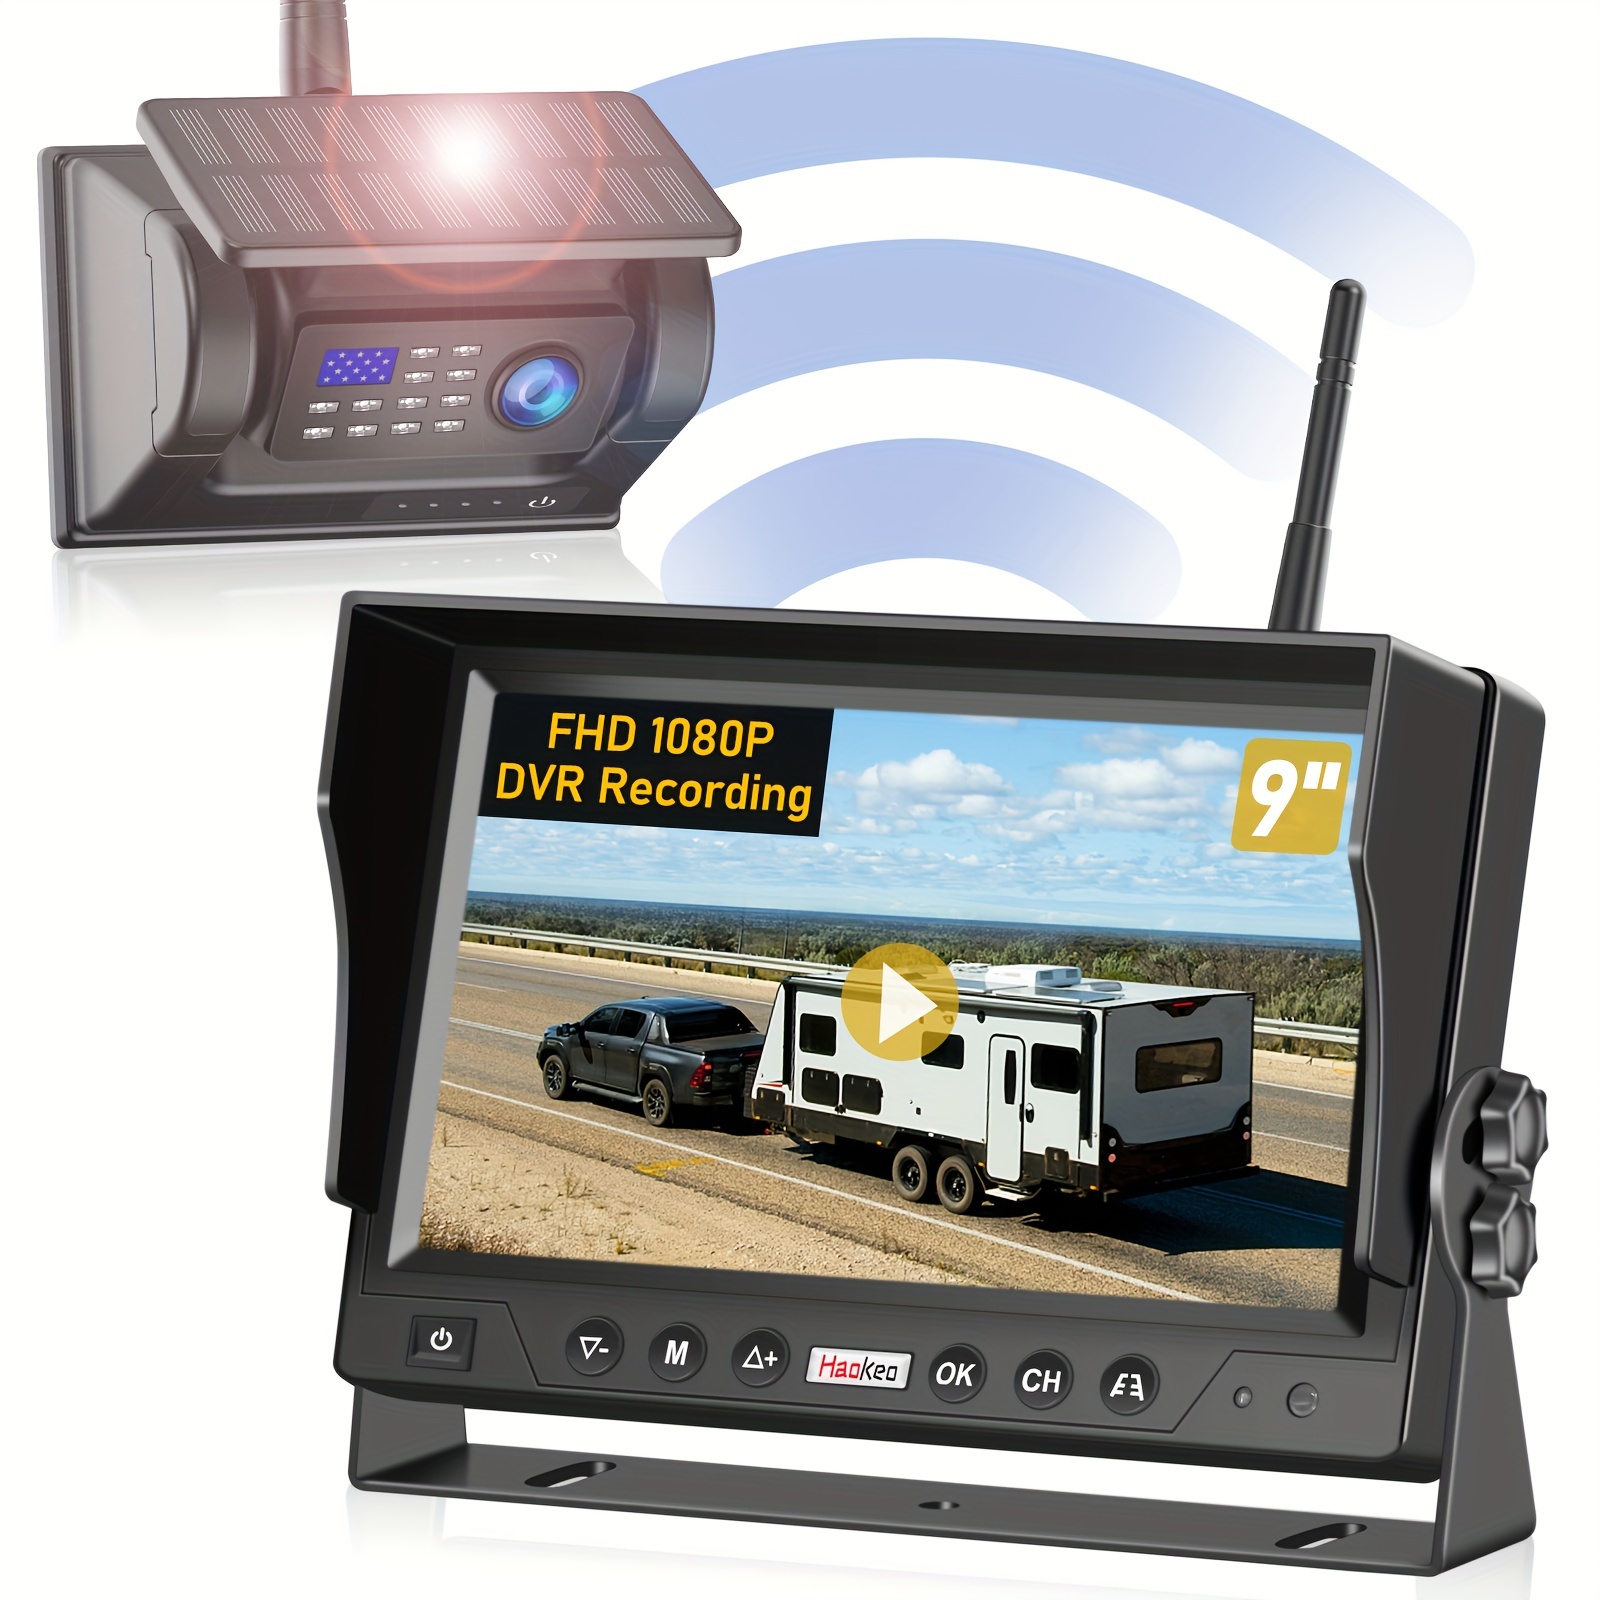 

Magnetic Solar Rv Trailer Wireless Backup Camera: Recording Hd1080p 9'' Dvr Monitor 3-mins Easy To Install Rechargeable Reverse Camera System For Hitching Gooseneck Horse Fifth Wheels Car Camper